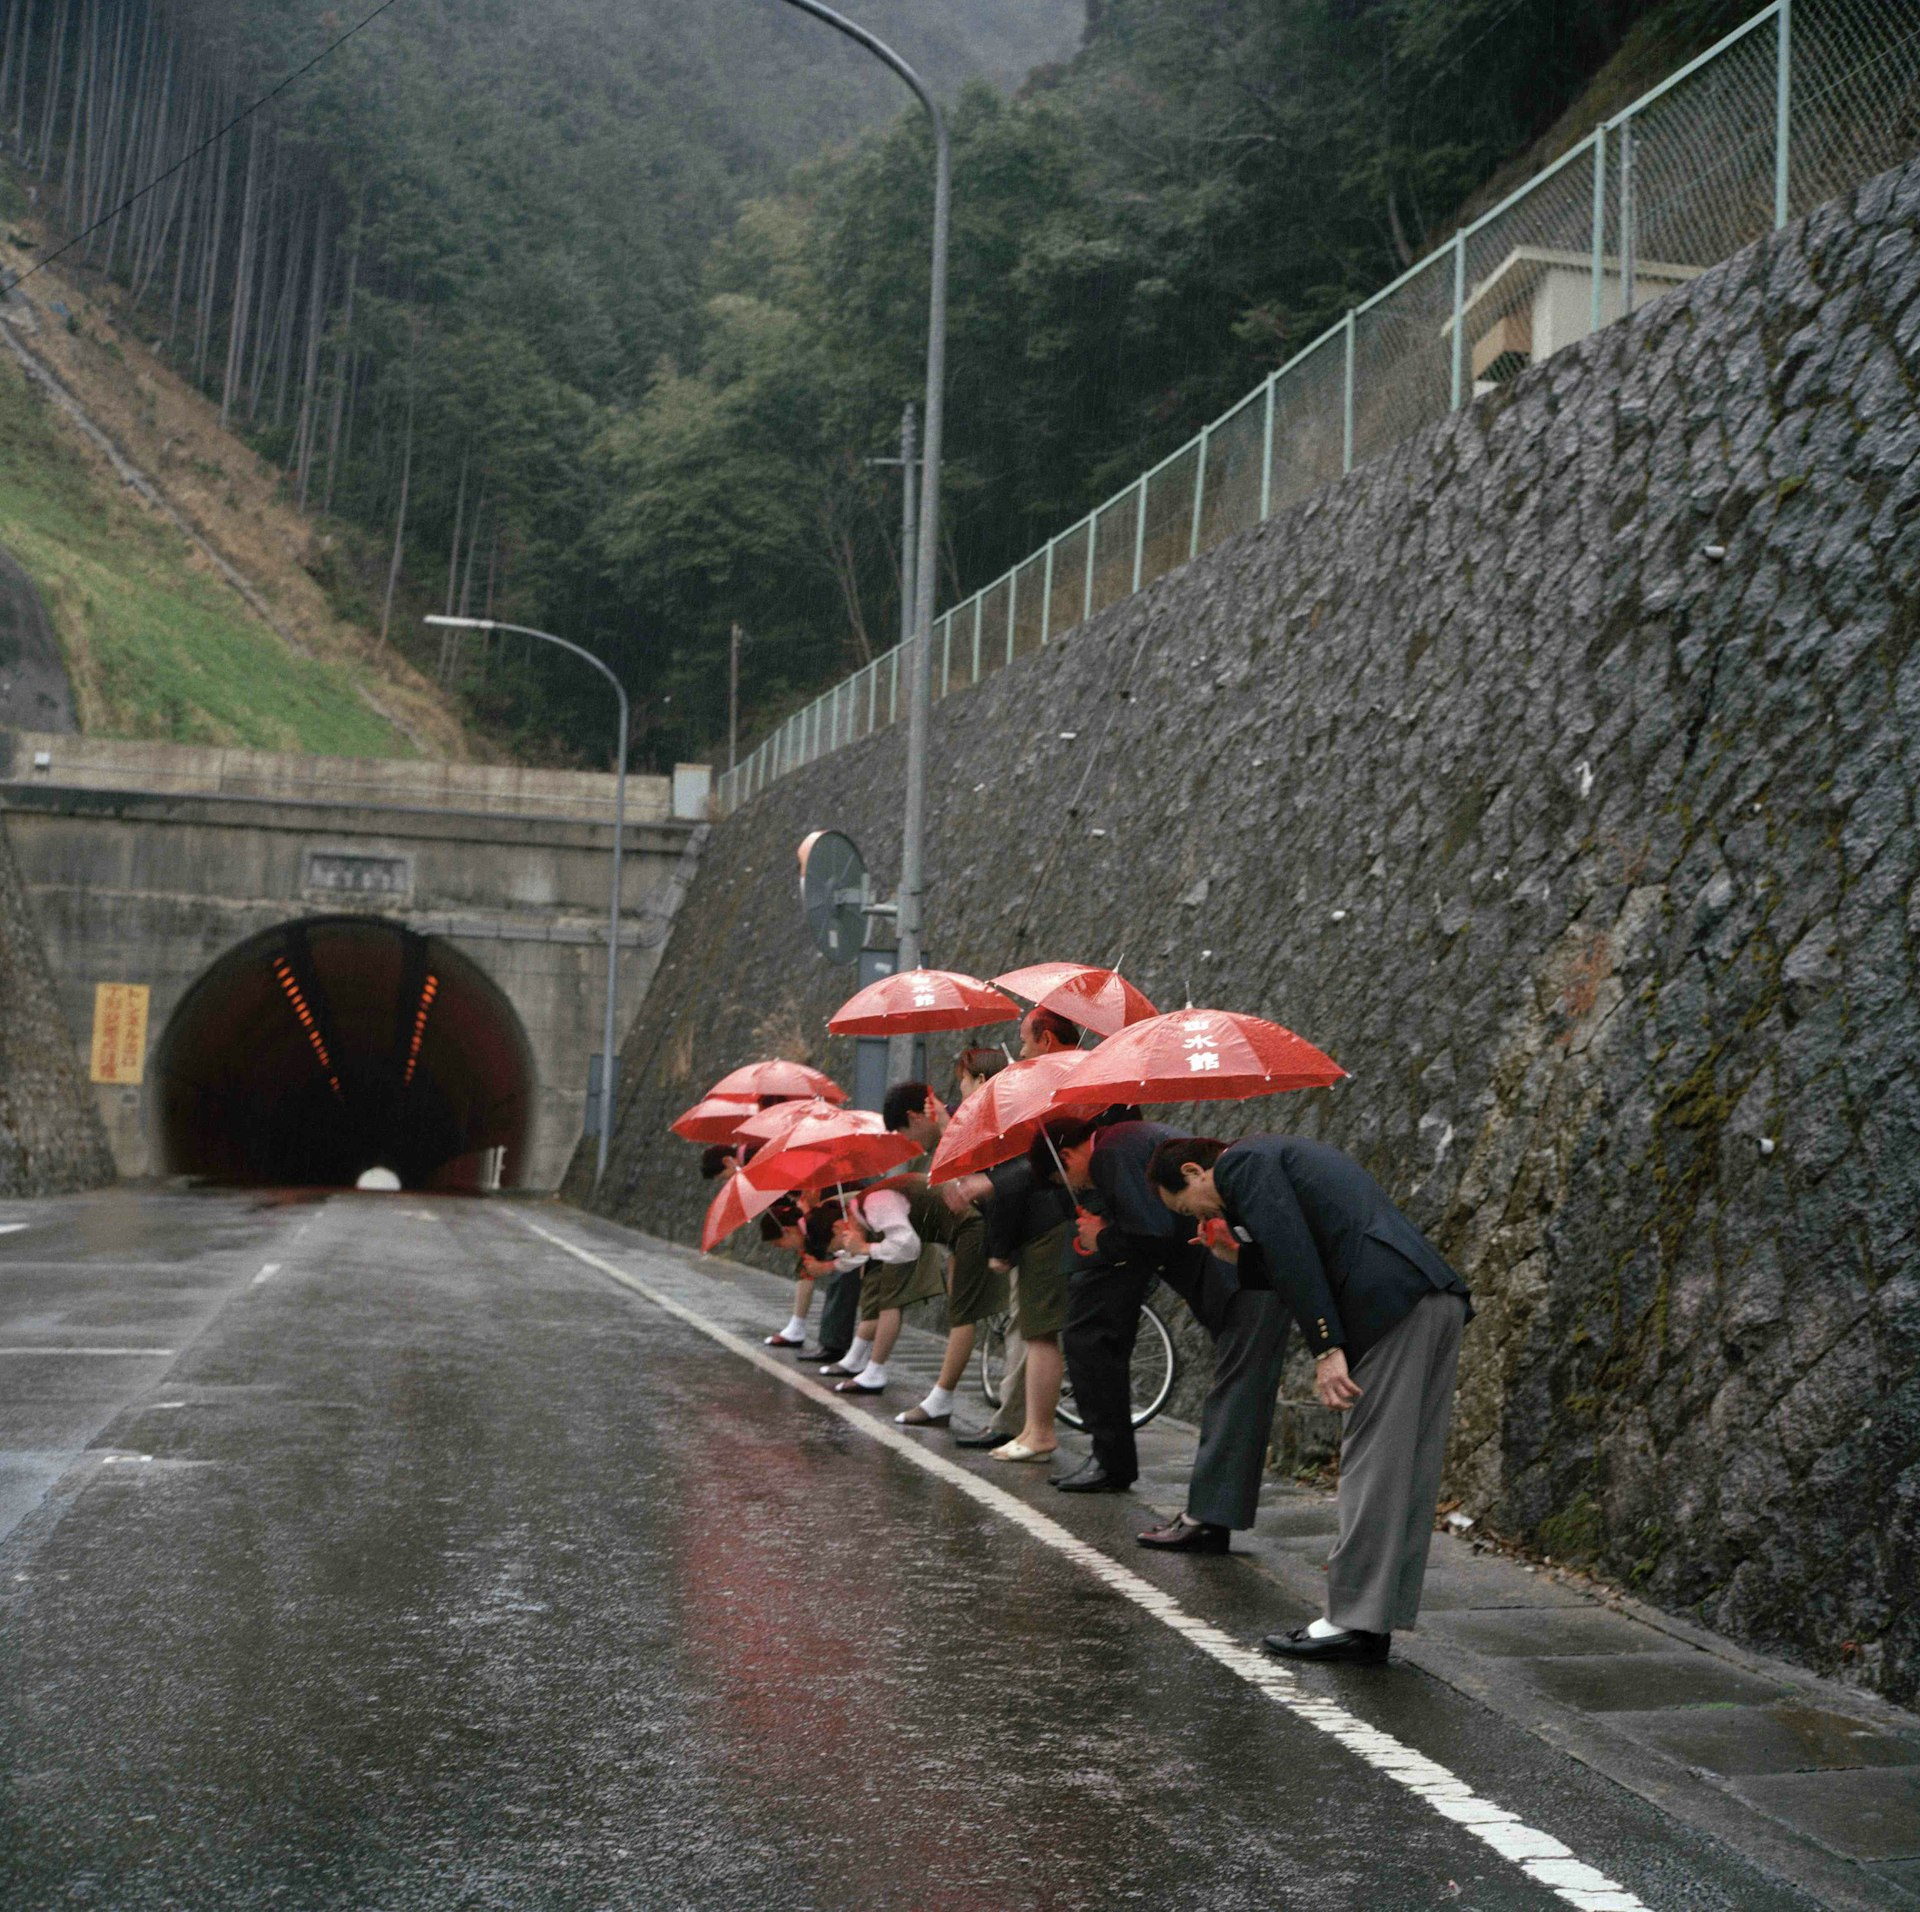 JAPAN. Wakayama Project. Hotel staff bow to leaving visitors, as competition is so fierce Hotels try to be as hospitable as possible. 1998. © Peter Marlow // Magnum Photos